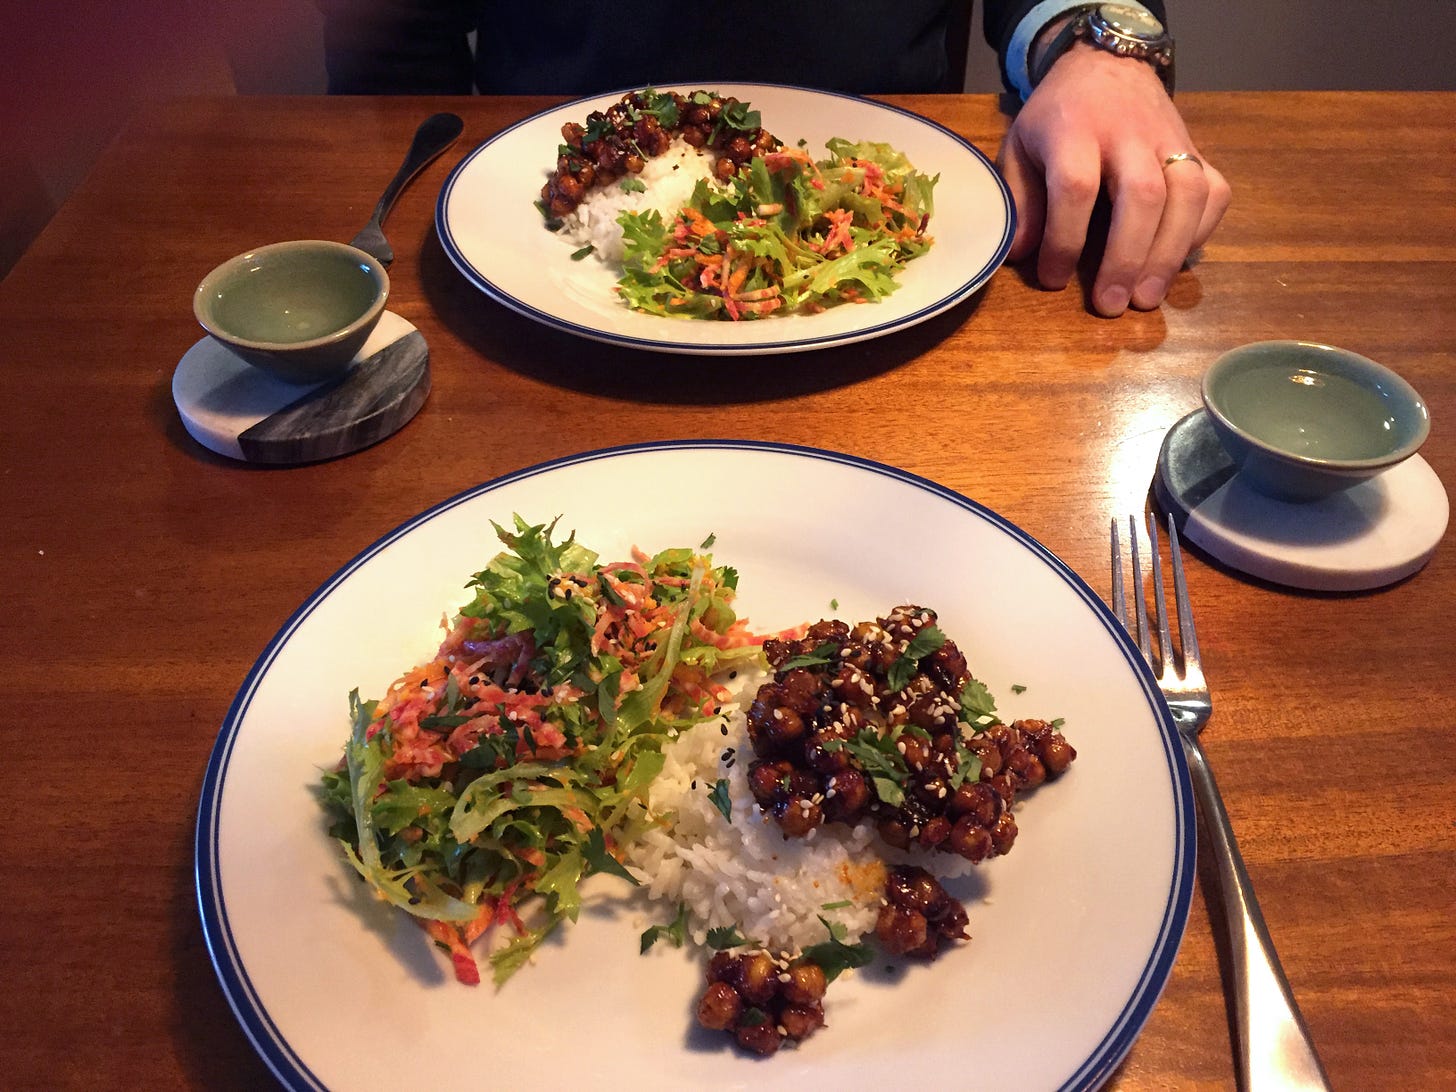 Two plates across from each other on the table, each about half full of a green salad with shredded Chiogga beet and carrot, and the other half filled with white rice and dark red glazed chickpeas. Cilantro and sesame seeds are sprinkled on top. Two small cups of soju sit on coasters next to the plates.